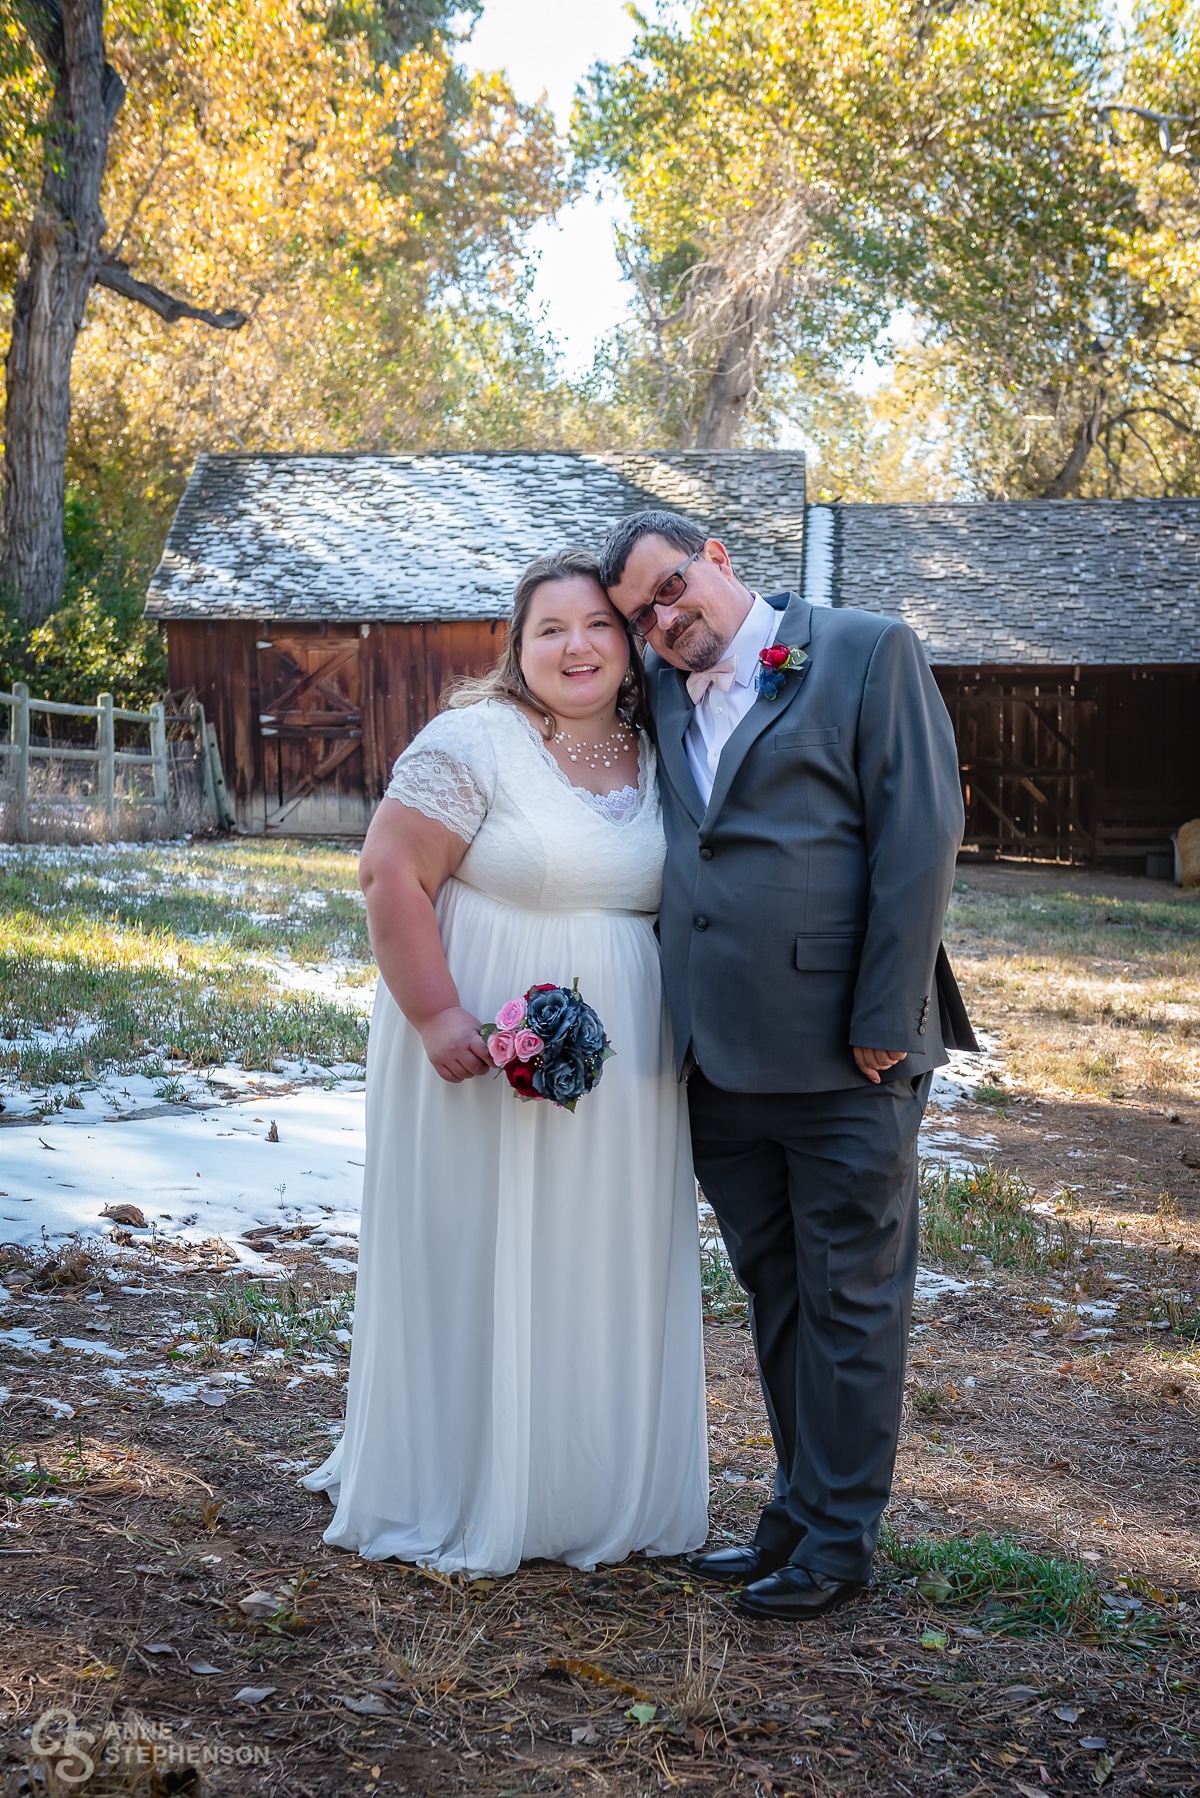 The bride and groom in front of Boyko Barn and the snowy landscape.